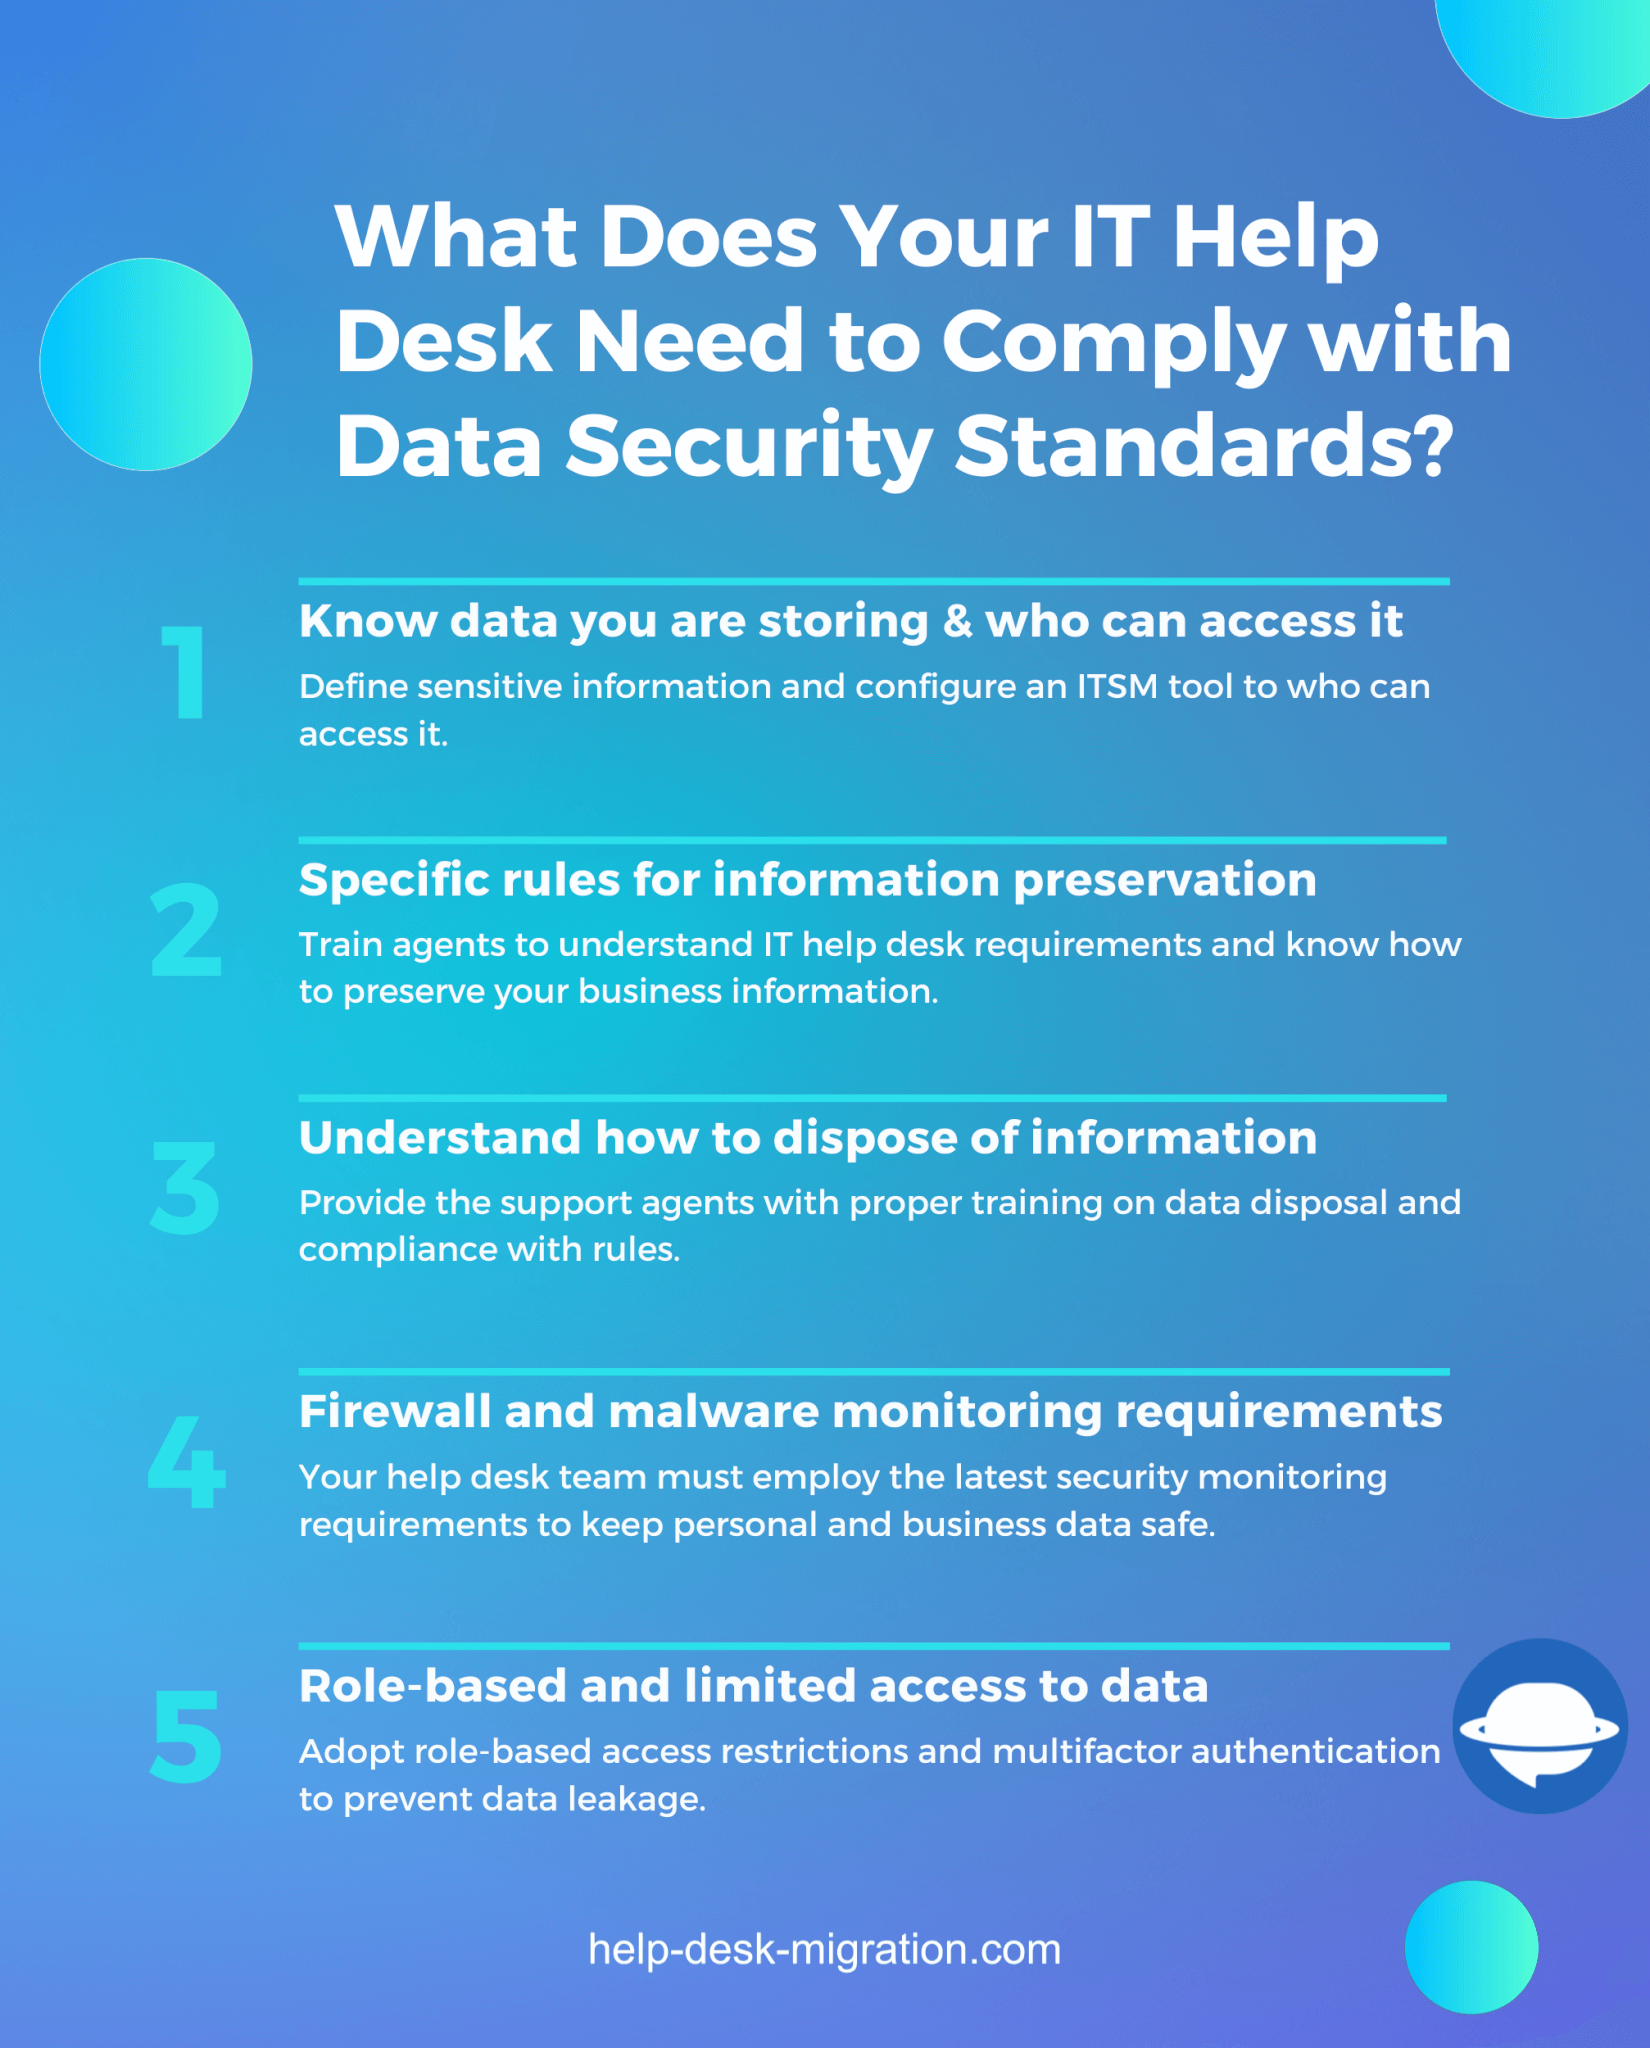 Data Security Standards